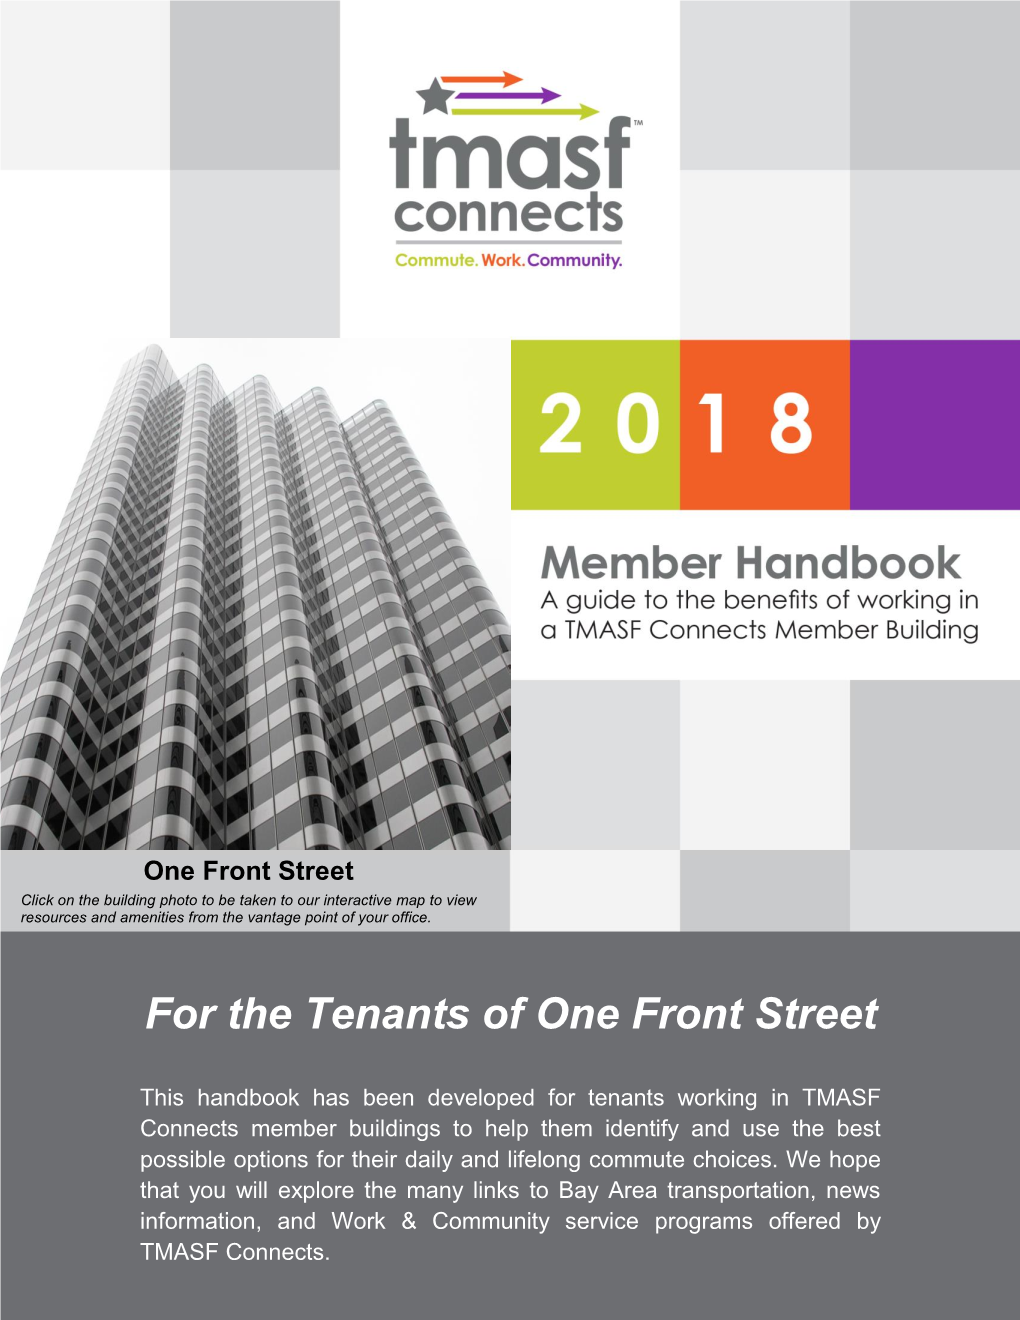 TMASF Connects Member Buildings to Help Them Identify and Use the Best Possible Options for Their Daily and Lifelong Commute Choices